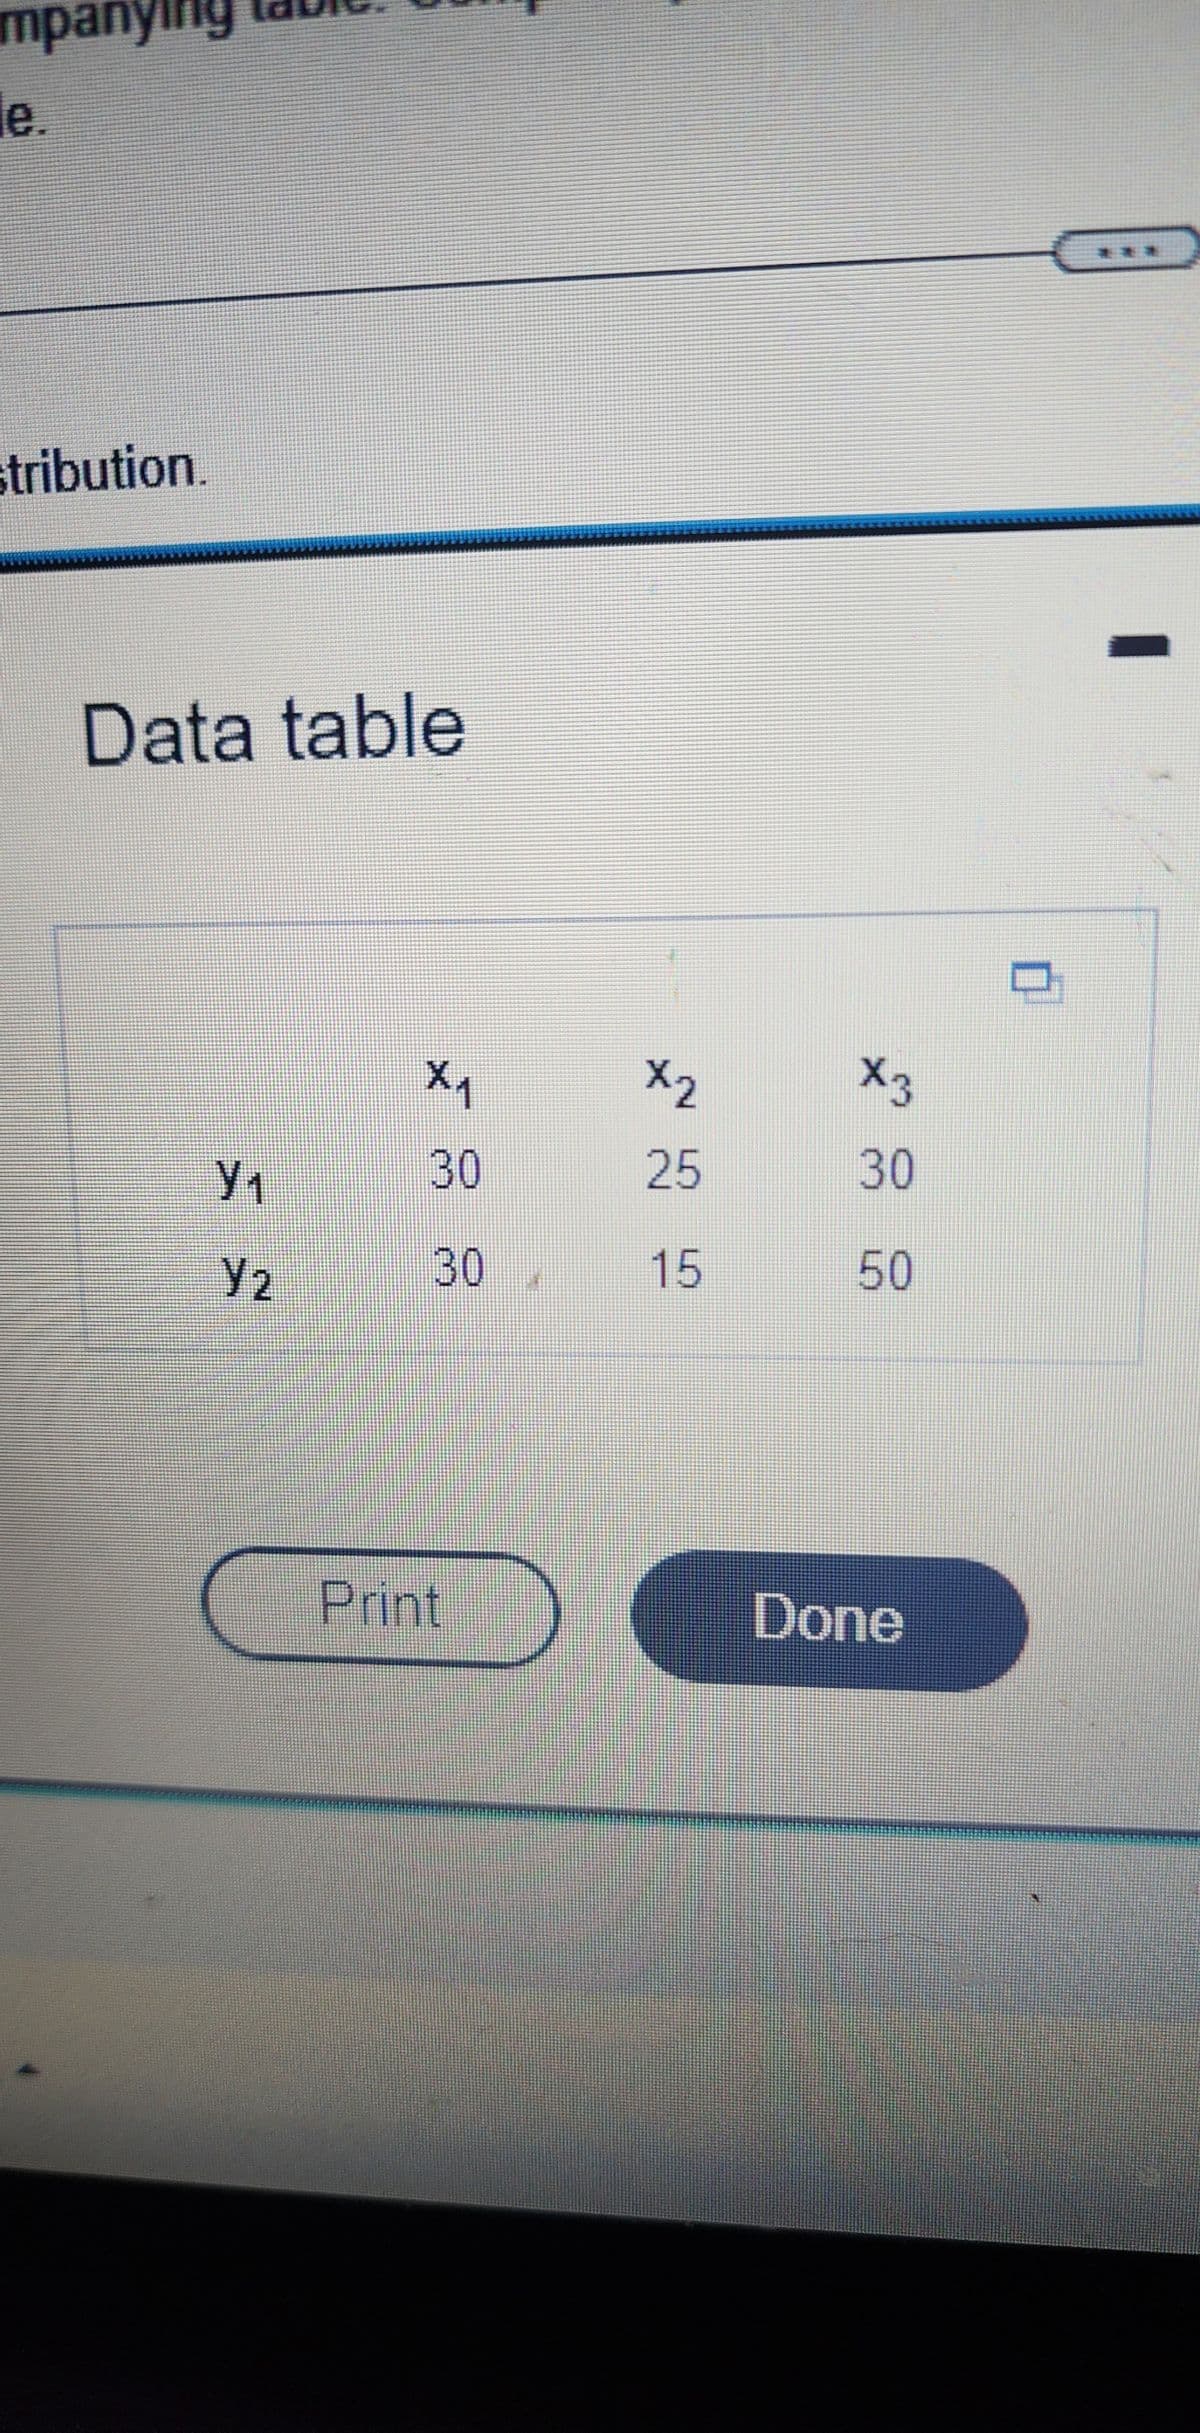 mpanying
le.
stribution.
Data table
Y₁
Y2
X₁
30
Print
X₂
25
15
X3
30
50
Done